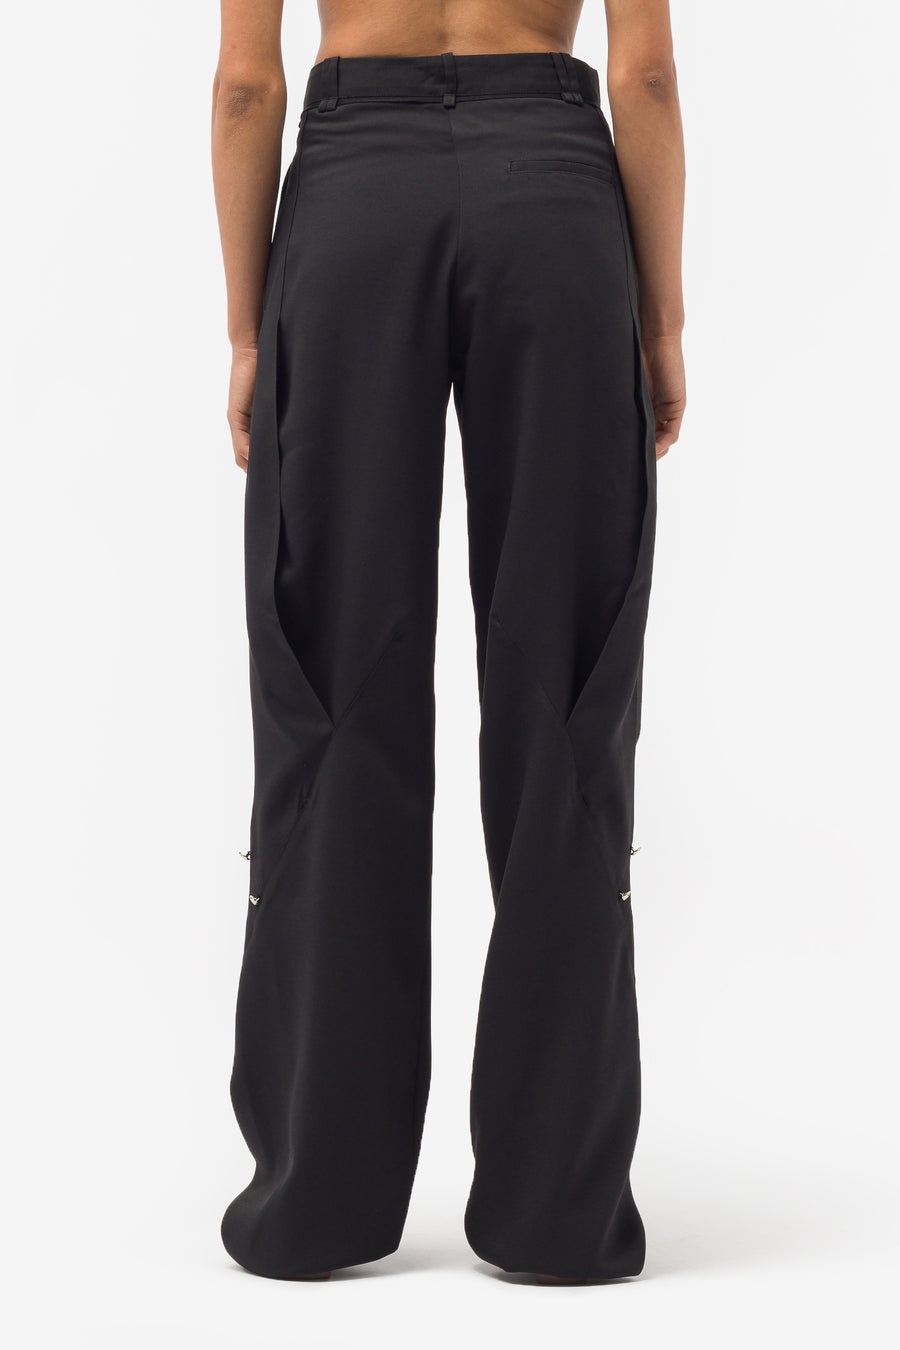 Hina Pleat Trousers in Crow Black - 3